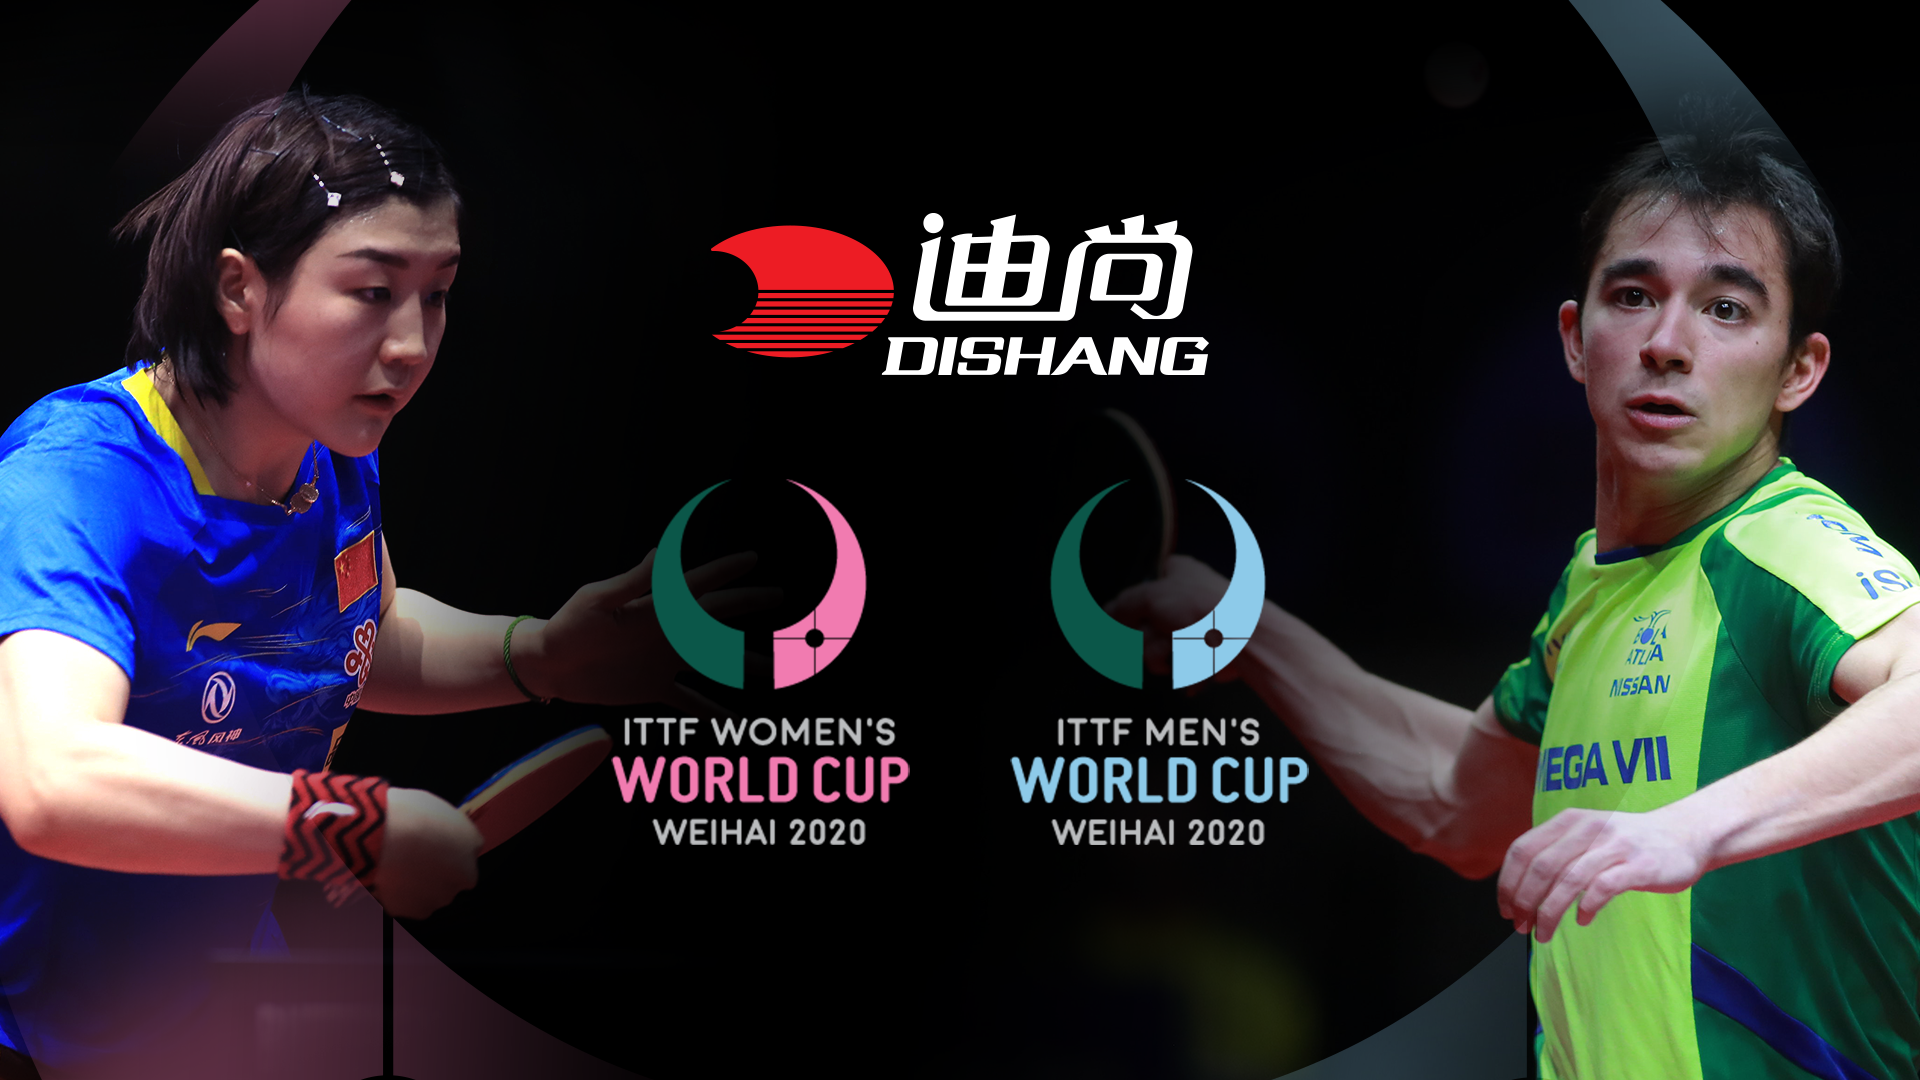 Dishang will serve as the title sponsor of the World Cup events ©ITTF